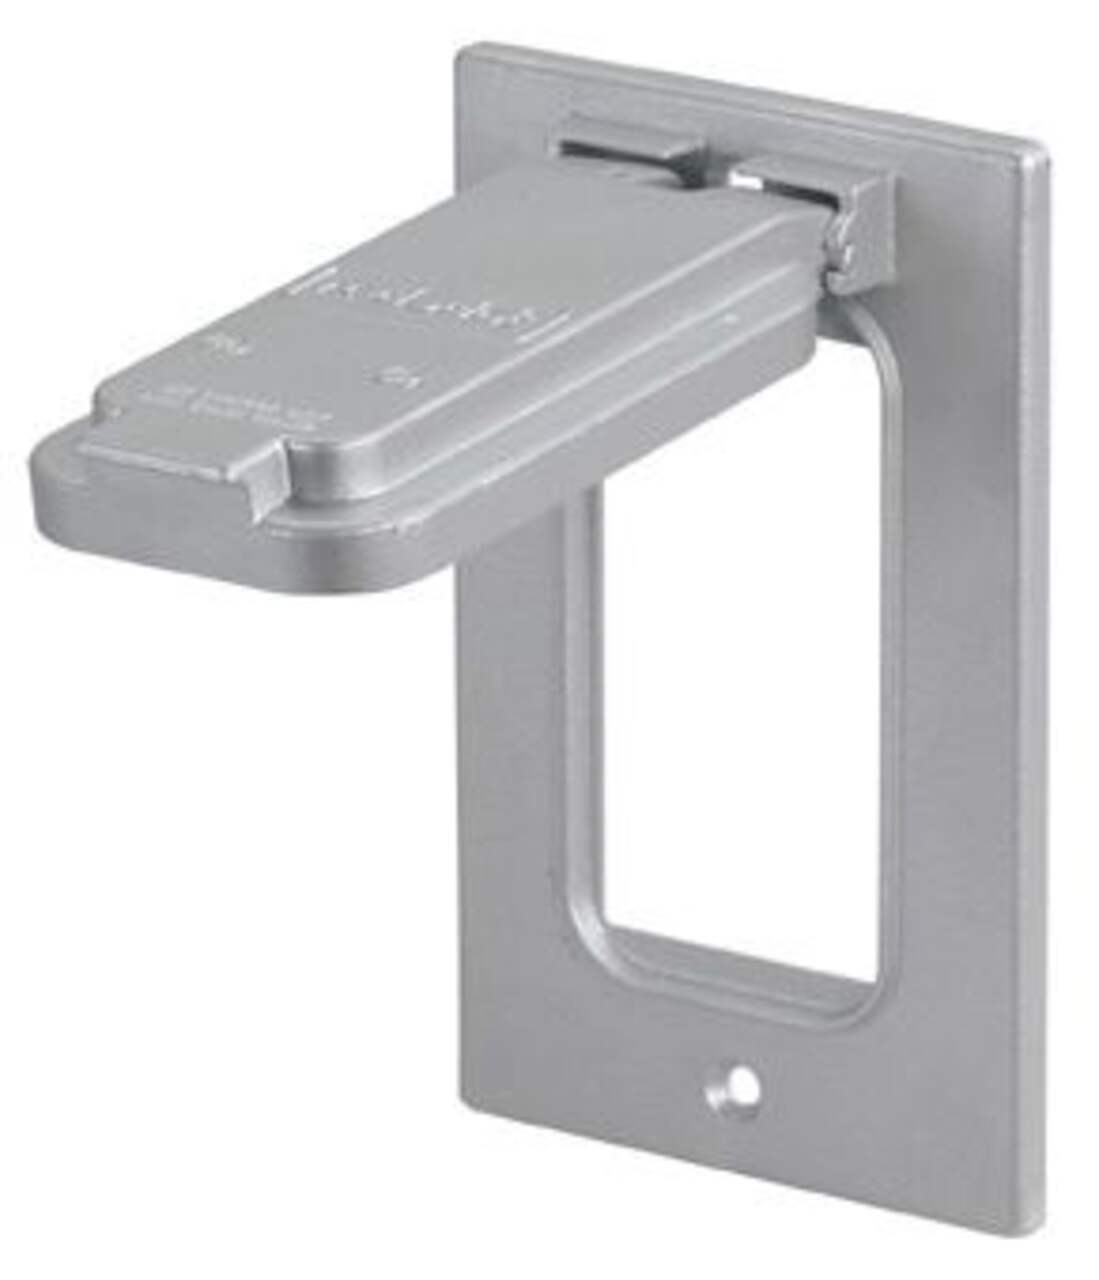 Thomas & Betts 37128-722 Vertical Duplex Outdoor Outlet Cover, Includes  Gasket and Screws, Grey